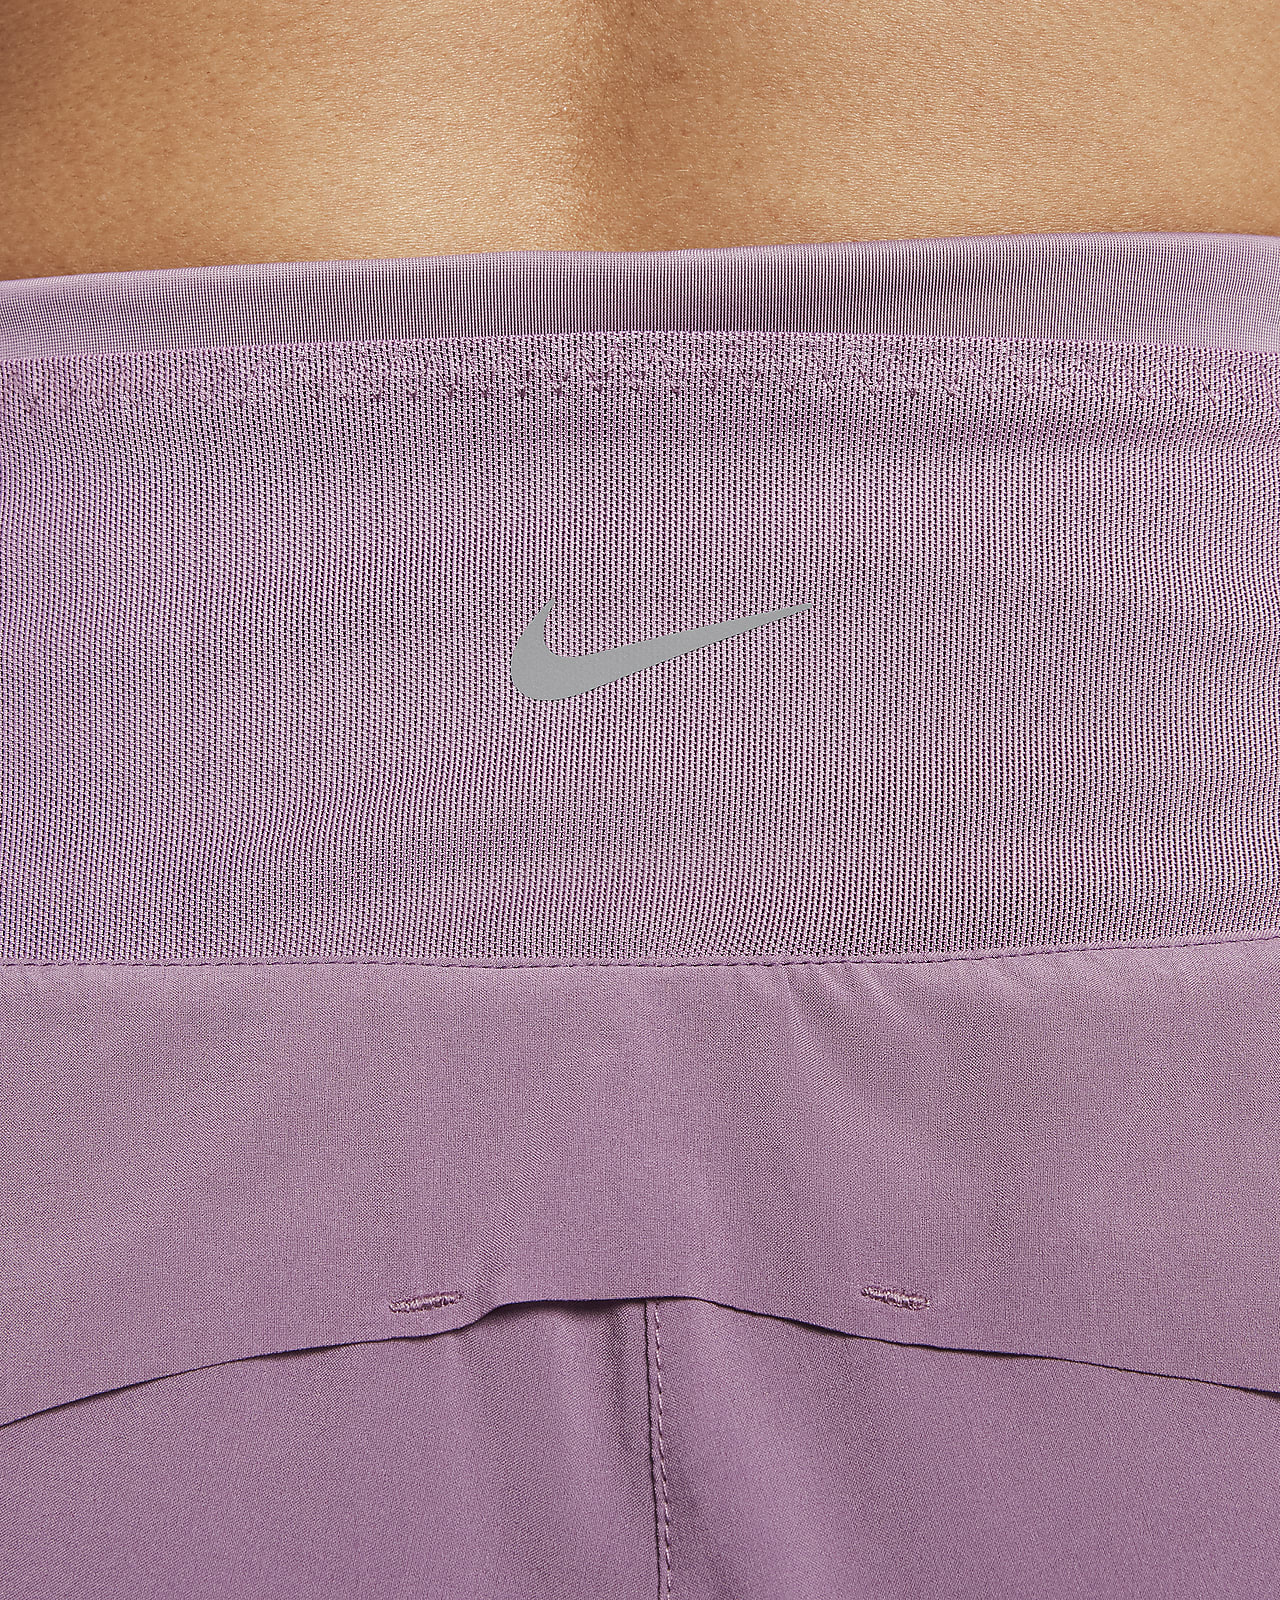 Nike Dri-FIT Running Division Women's High-Waisted 3 Brief-Lined Running  Shorts with Pockets